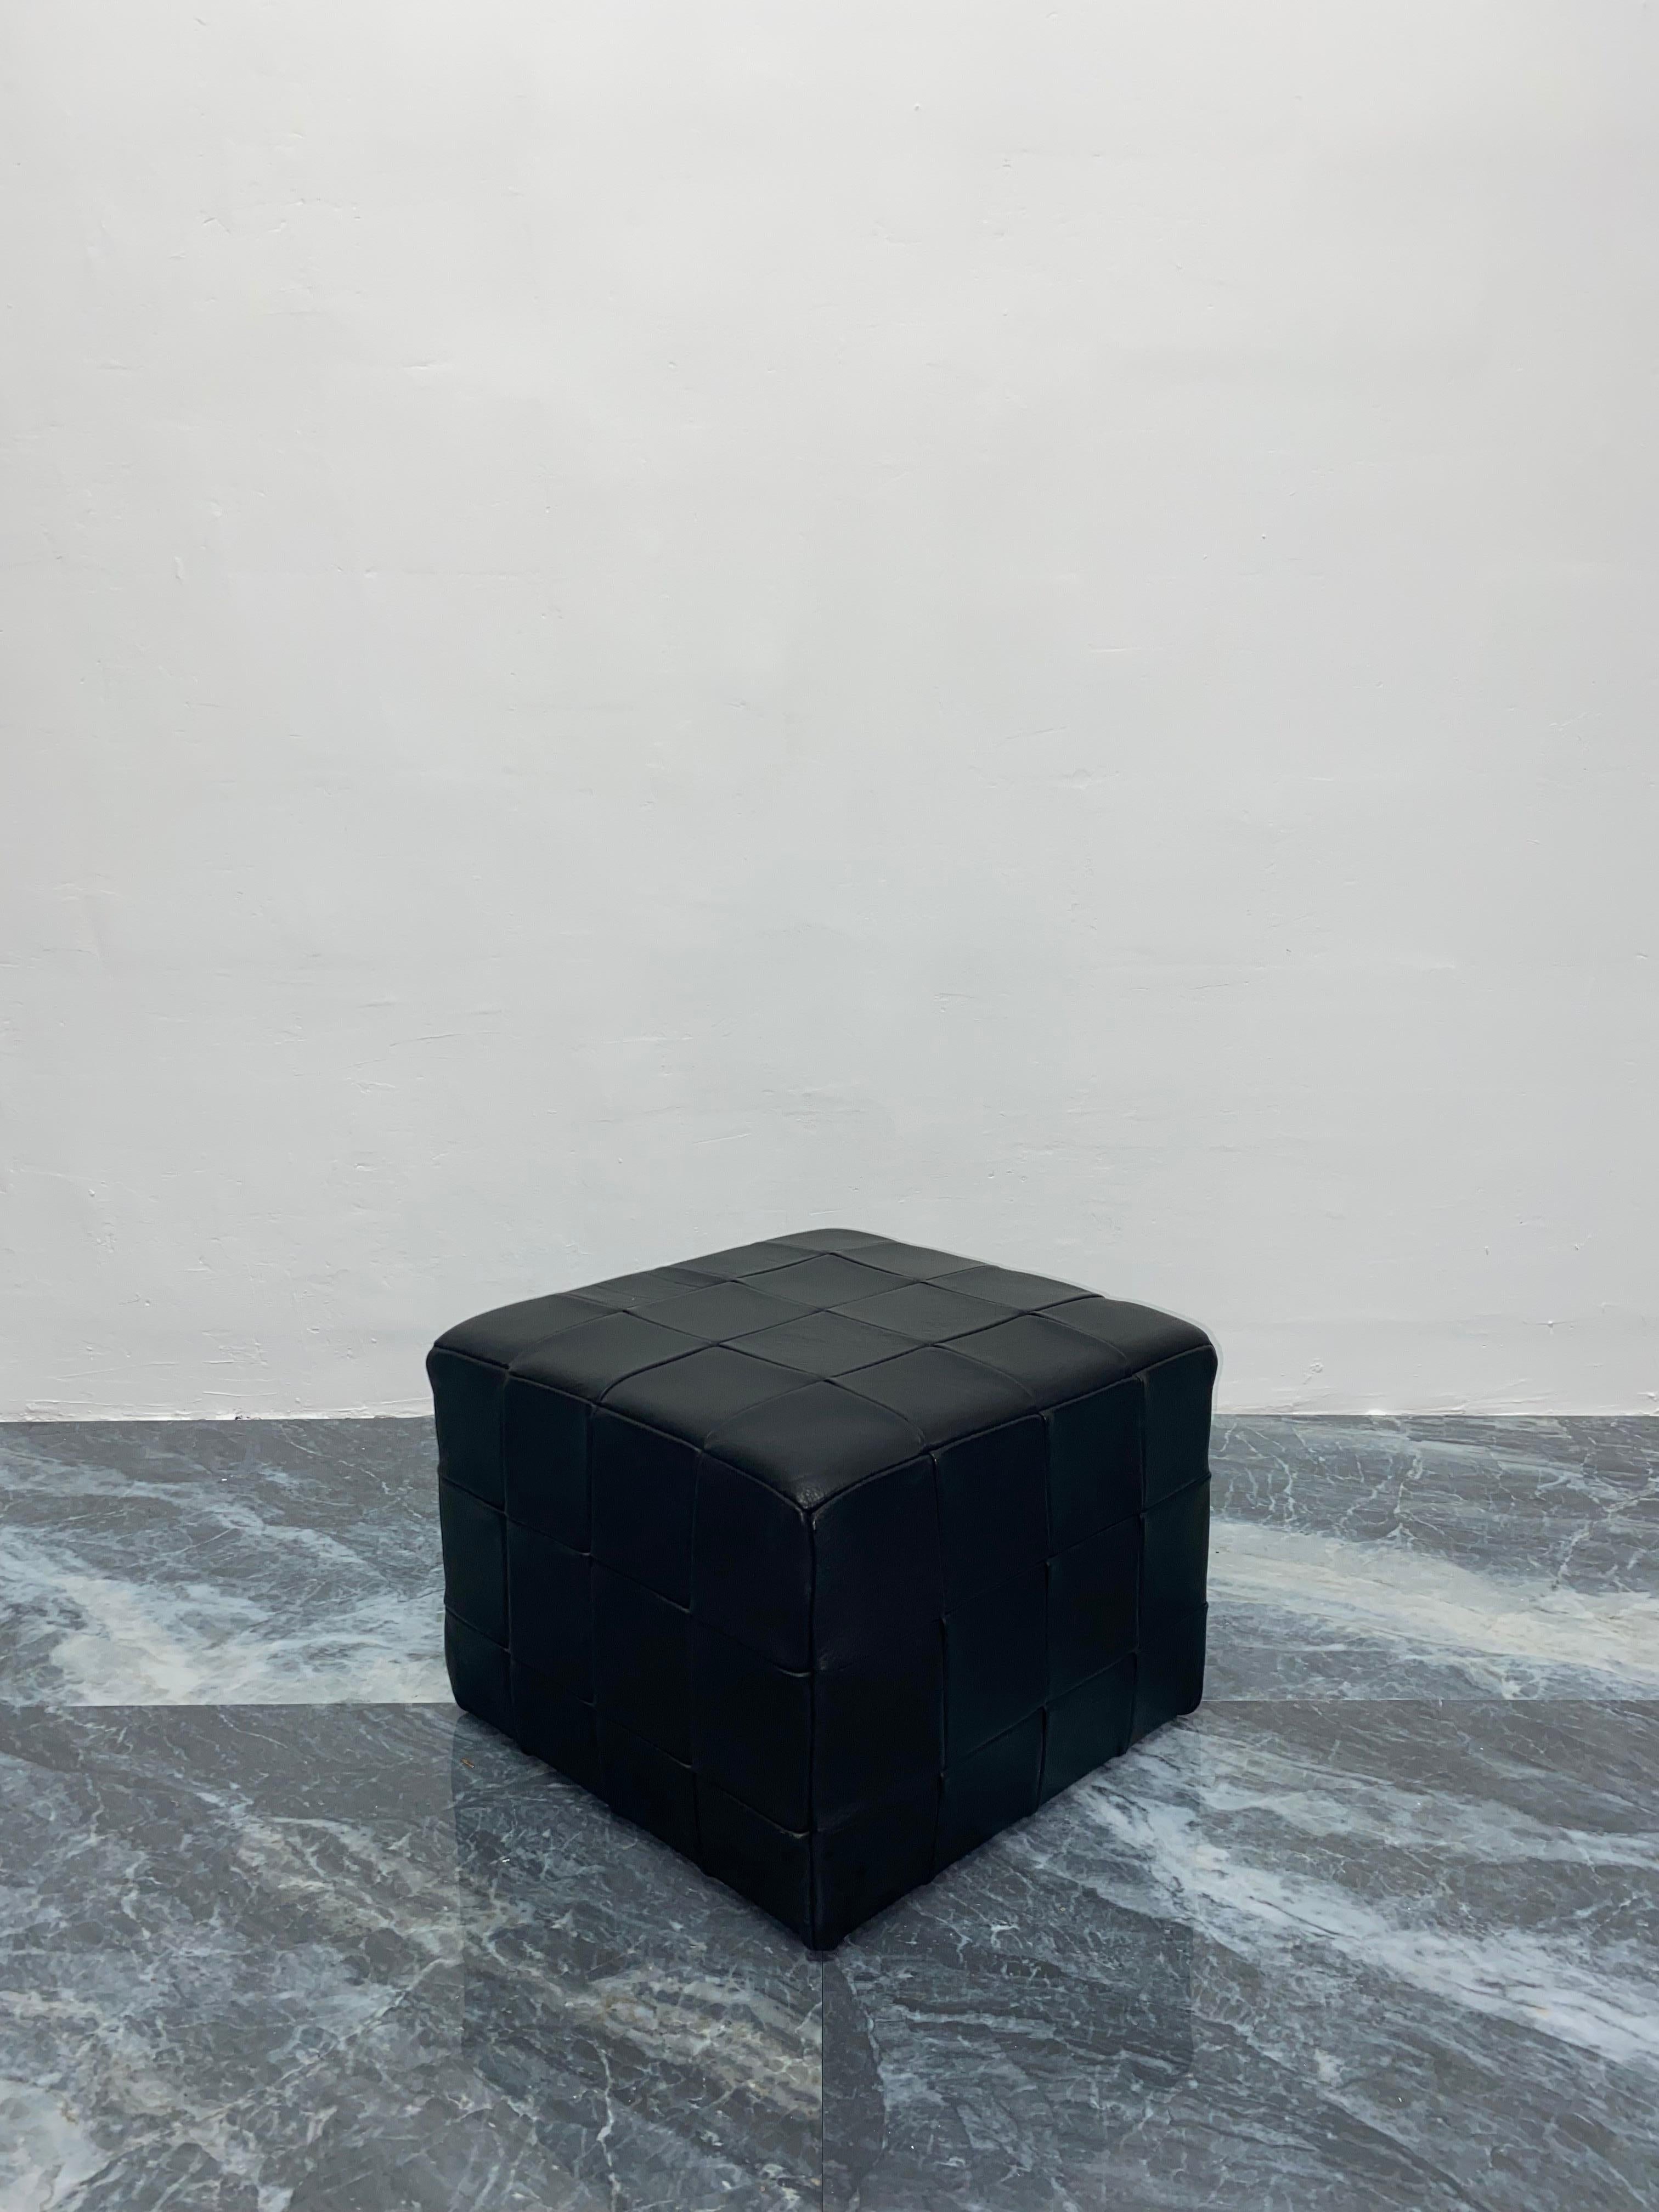 Mid-Century Modern Patchwork Black Leather Pouf or Ottoman, Denmark 1970s For Sale